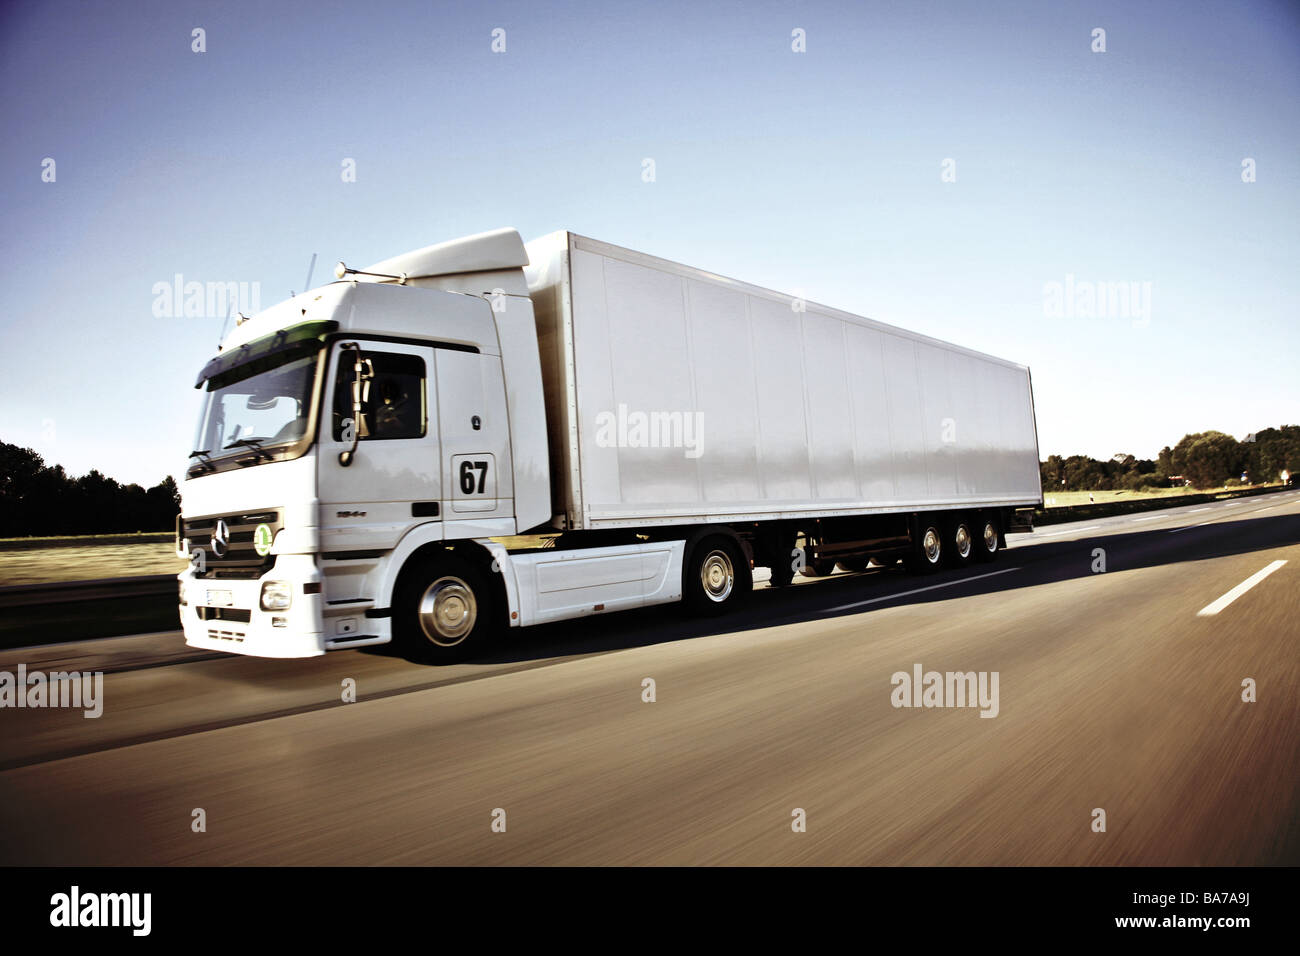 Highway truck with-drawn federal-highway street traffic vehicle trucks saddle-train transportation drives freight symbol Stock Photo